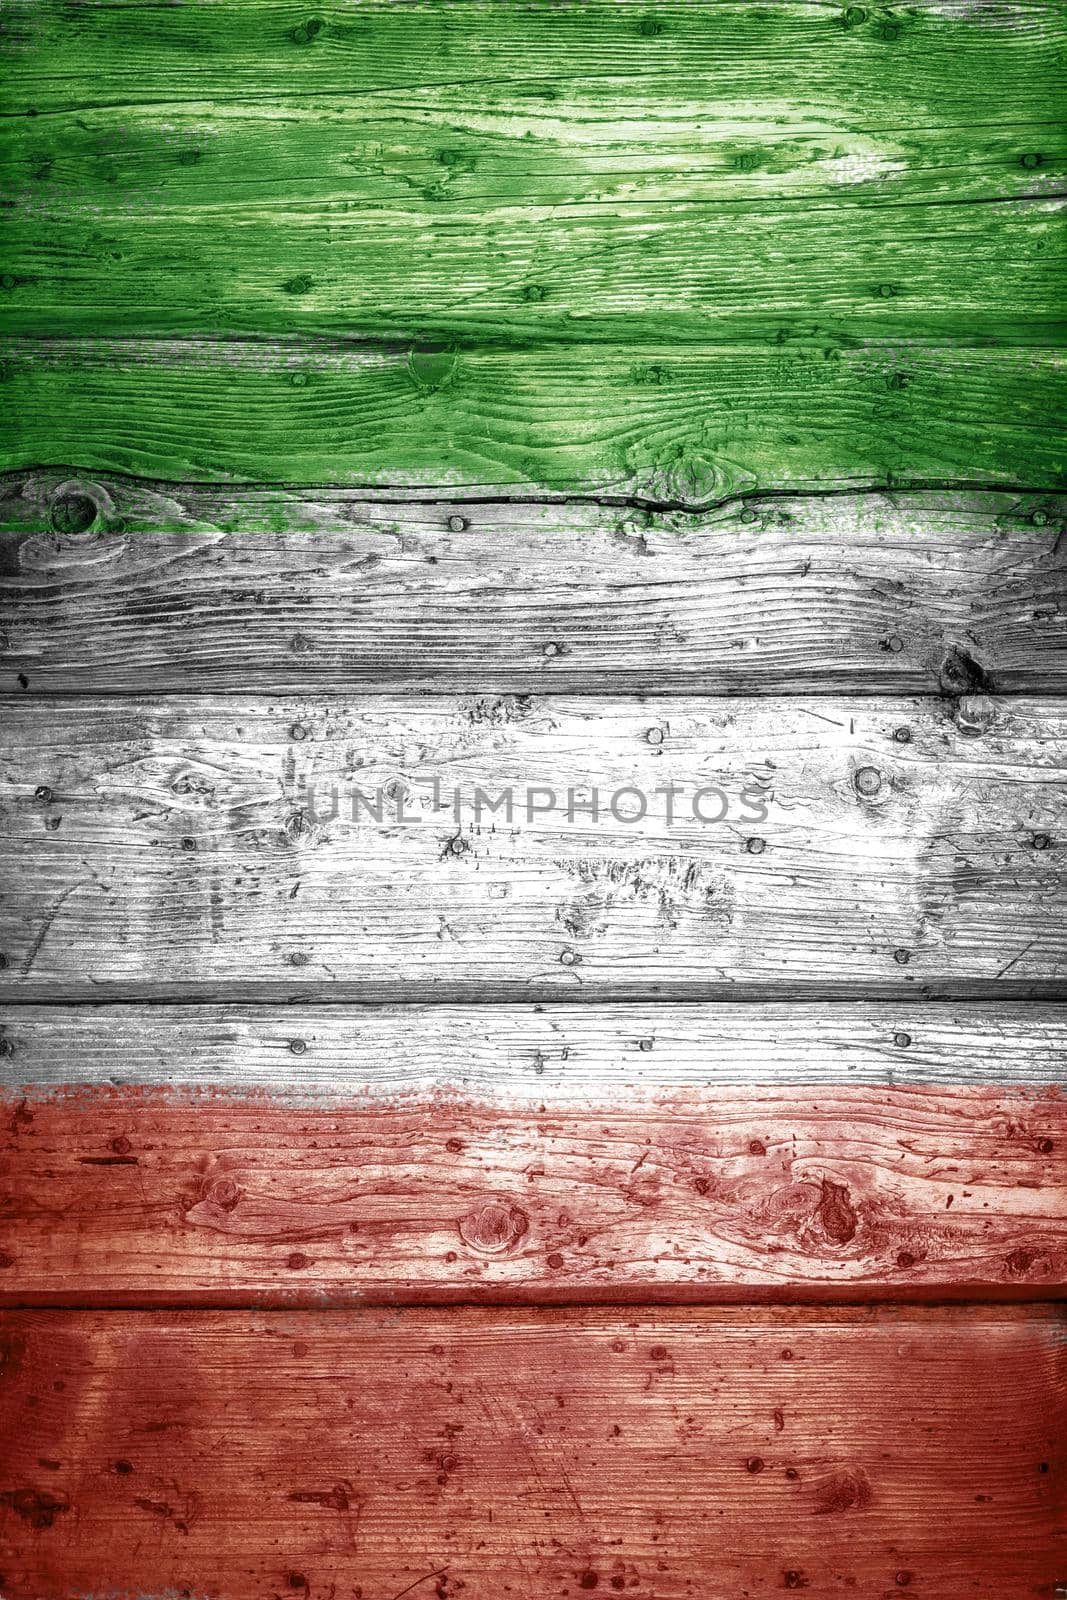 Italy Flag on wood background by germanopoli